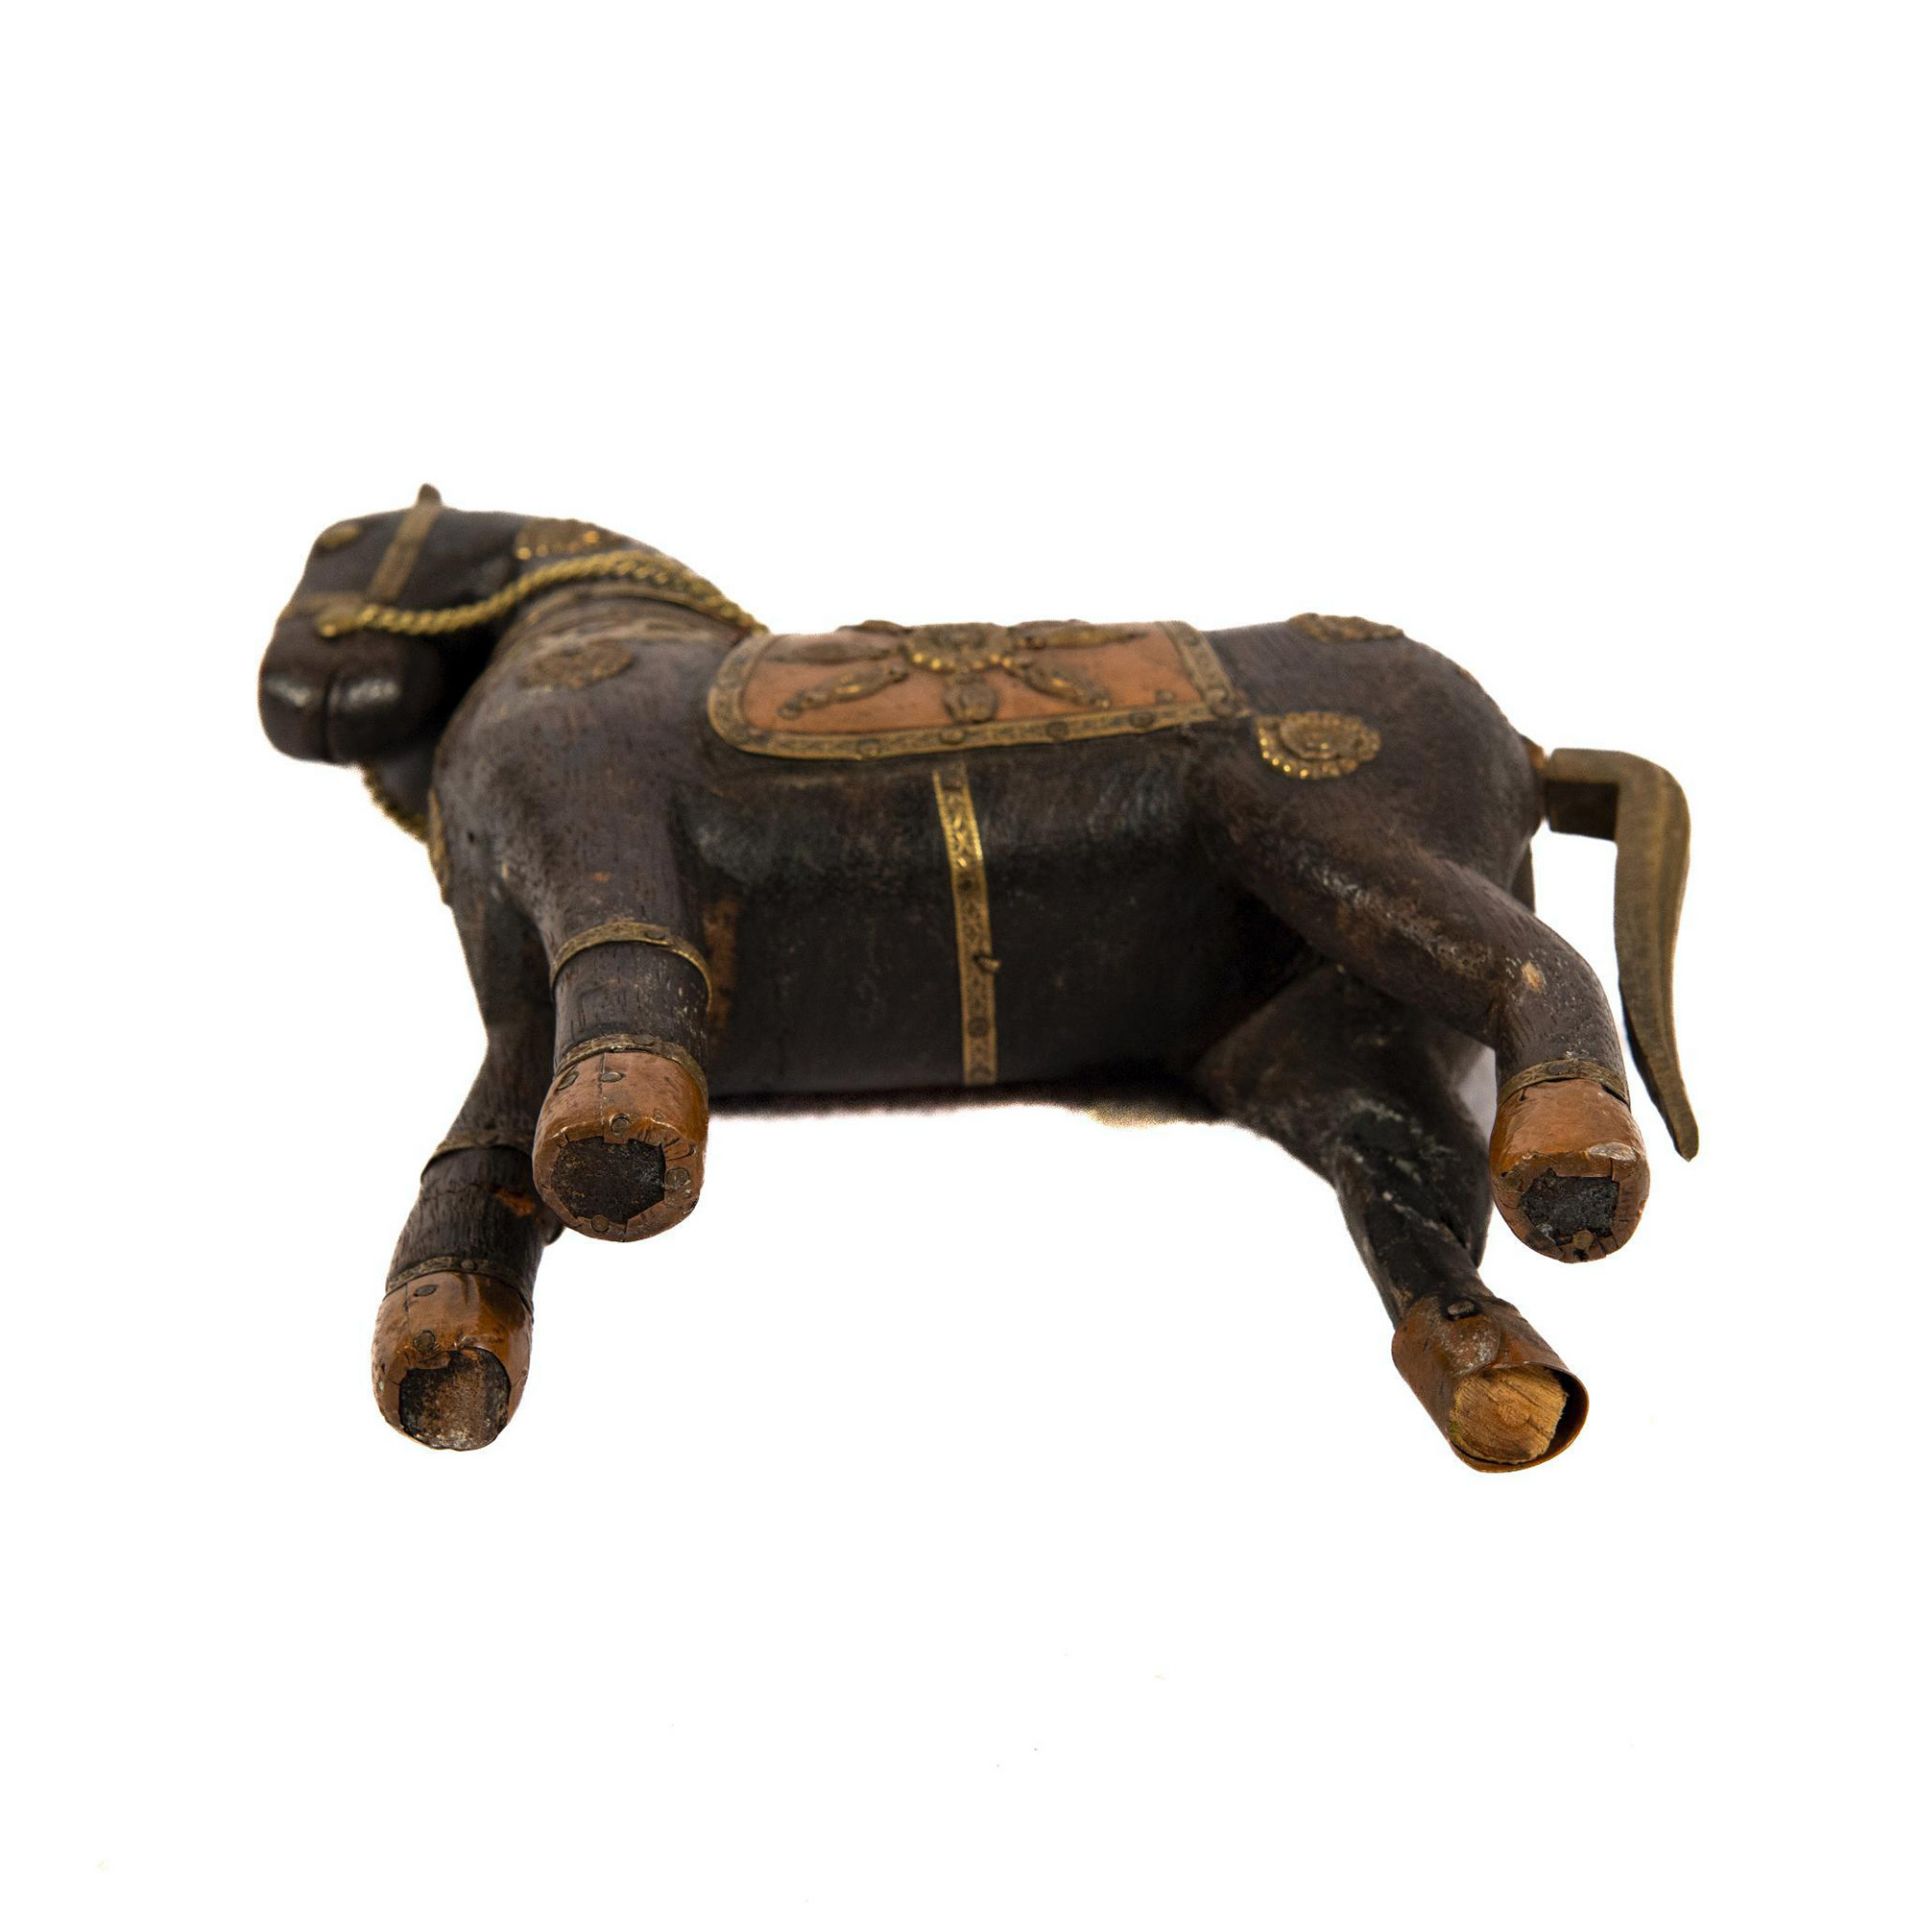 Rajasthani Indian Wooden War Horse, Brass & Copper Accents - Image 4 of 4